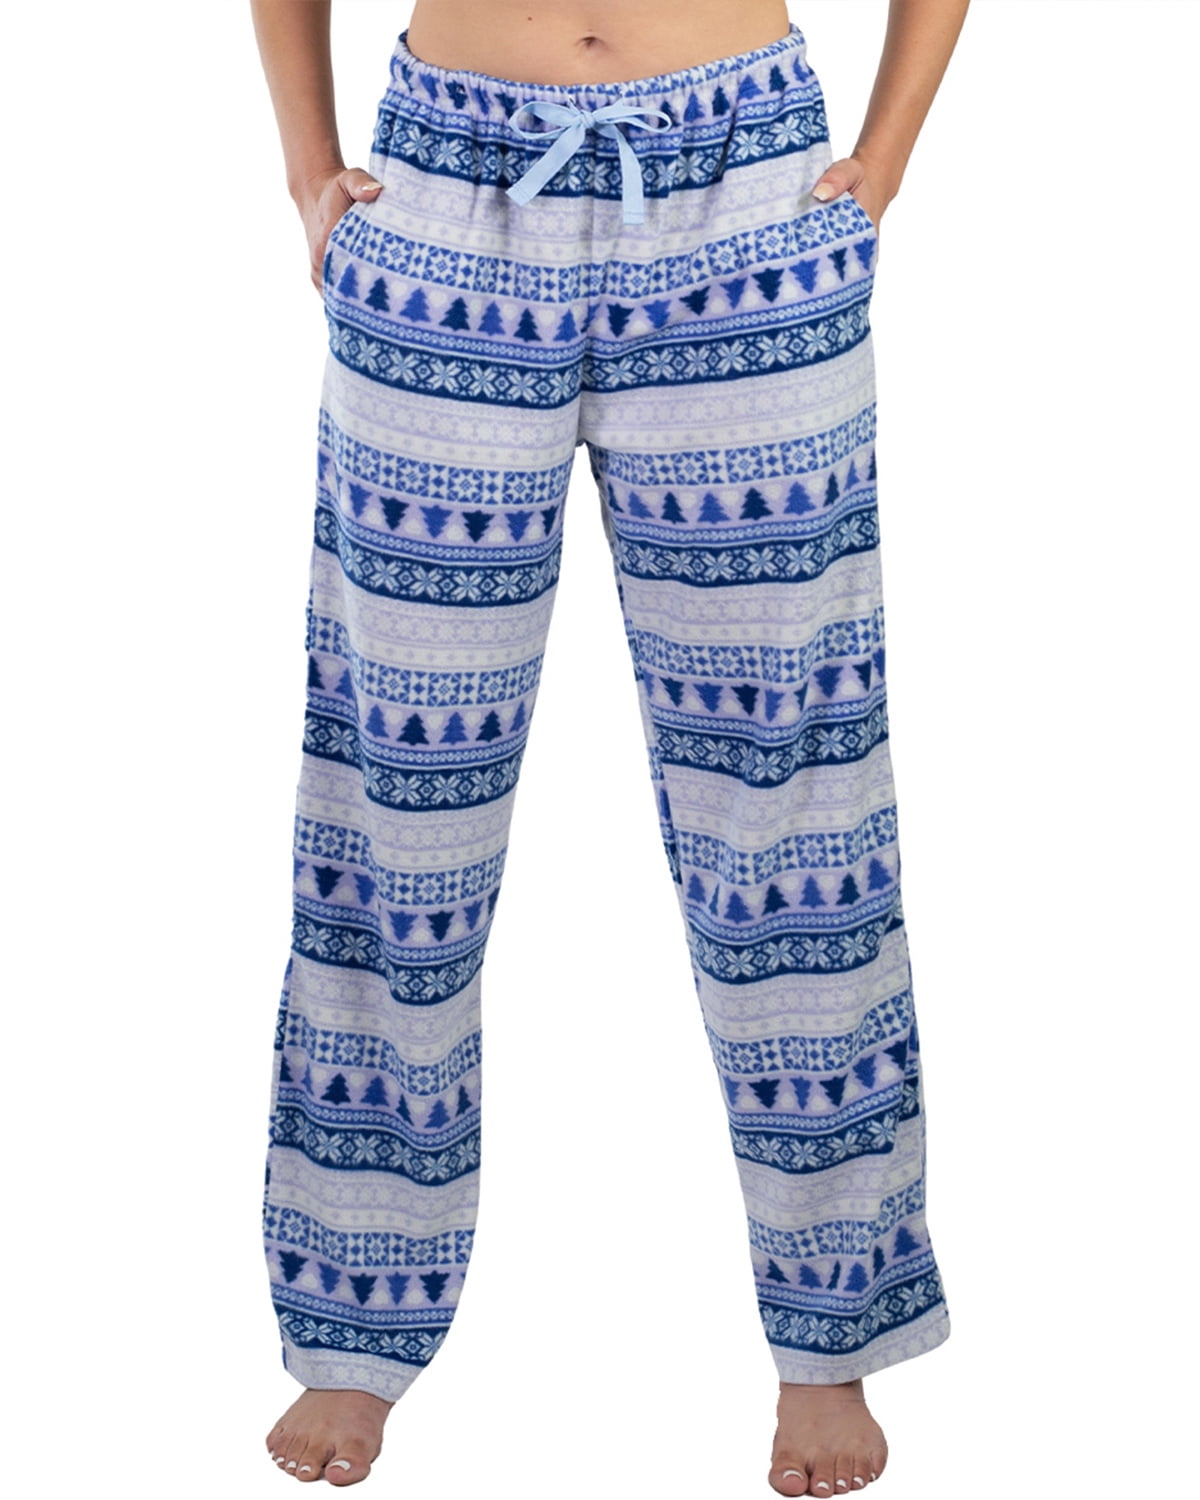 Jo & Bette Women's Fleece Pajama Pants with Pockets Plaid Comfy Lounge Pants  Regular and Plus Size, Classic Patterns at  Women's Clothing store